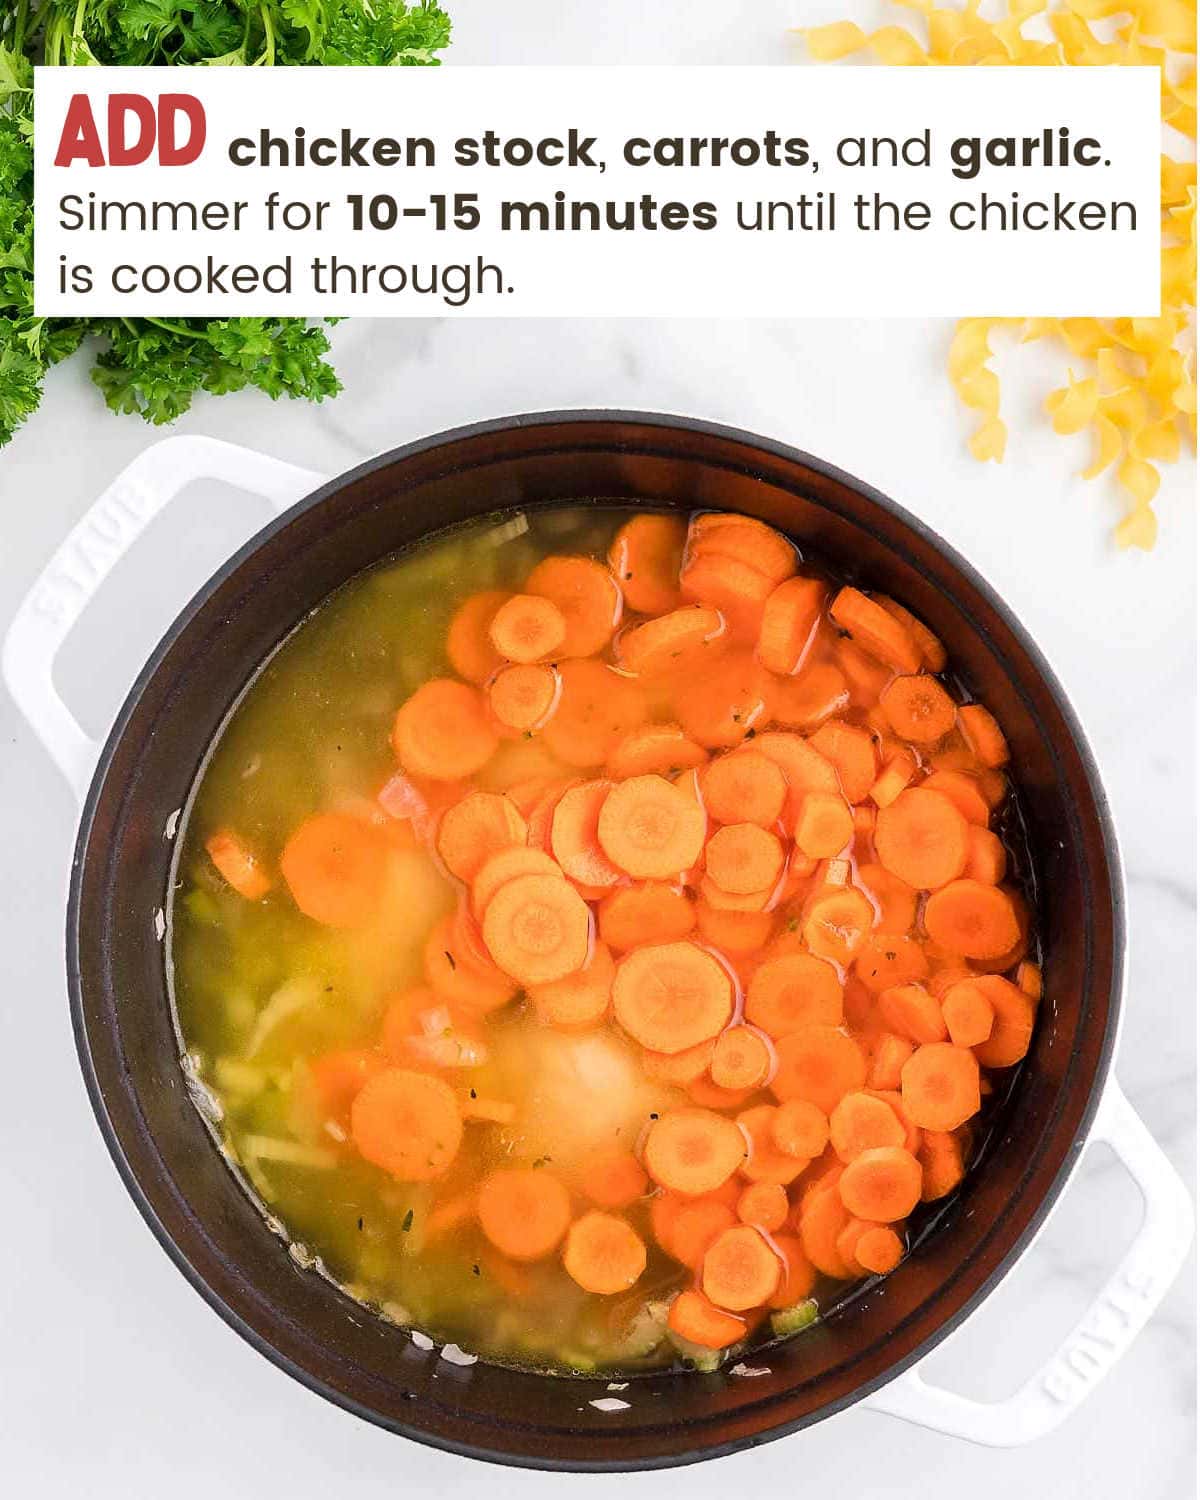 Simmering carrots, celery and chicken in a Dutch oven.